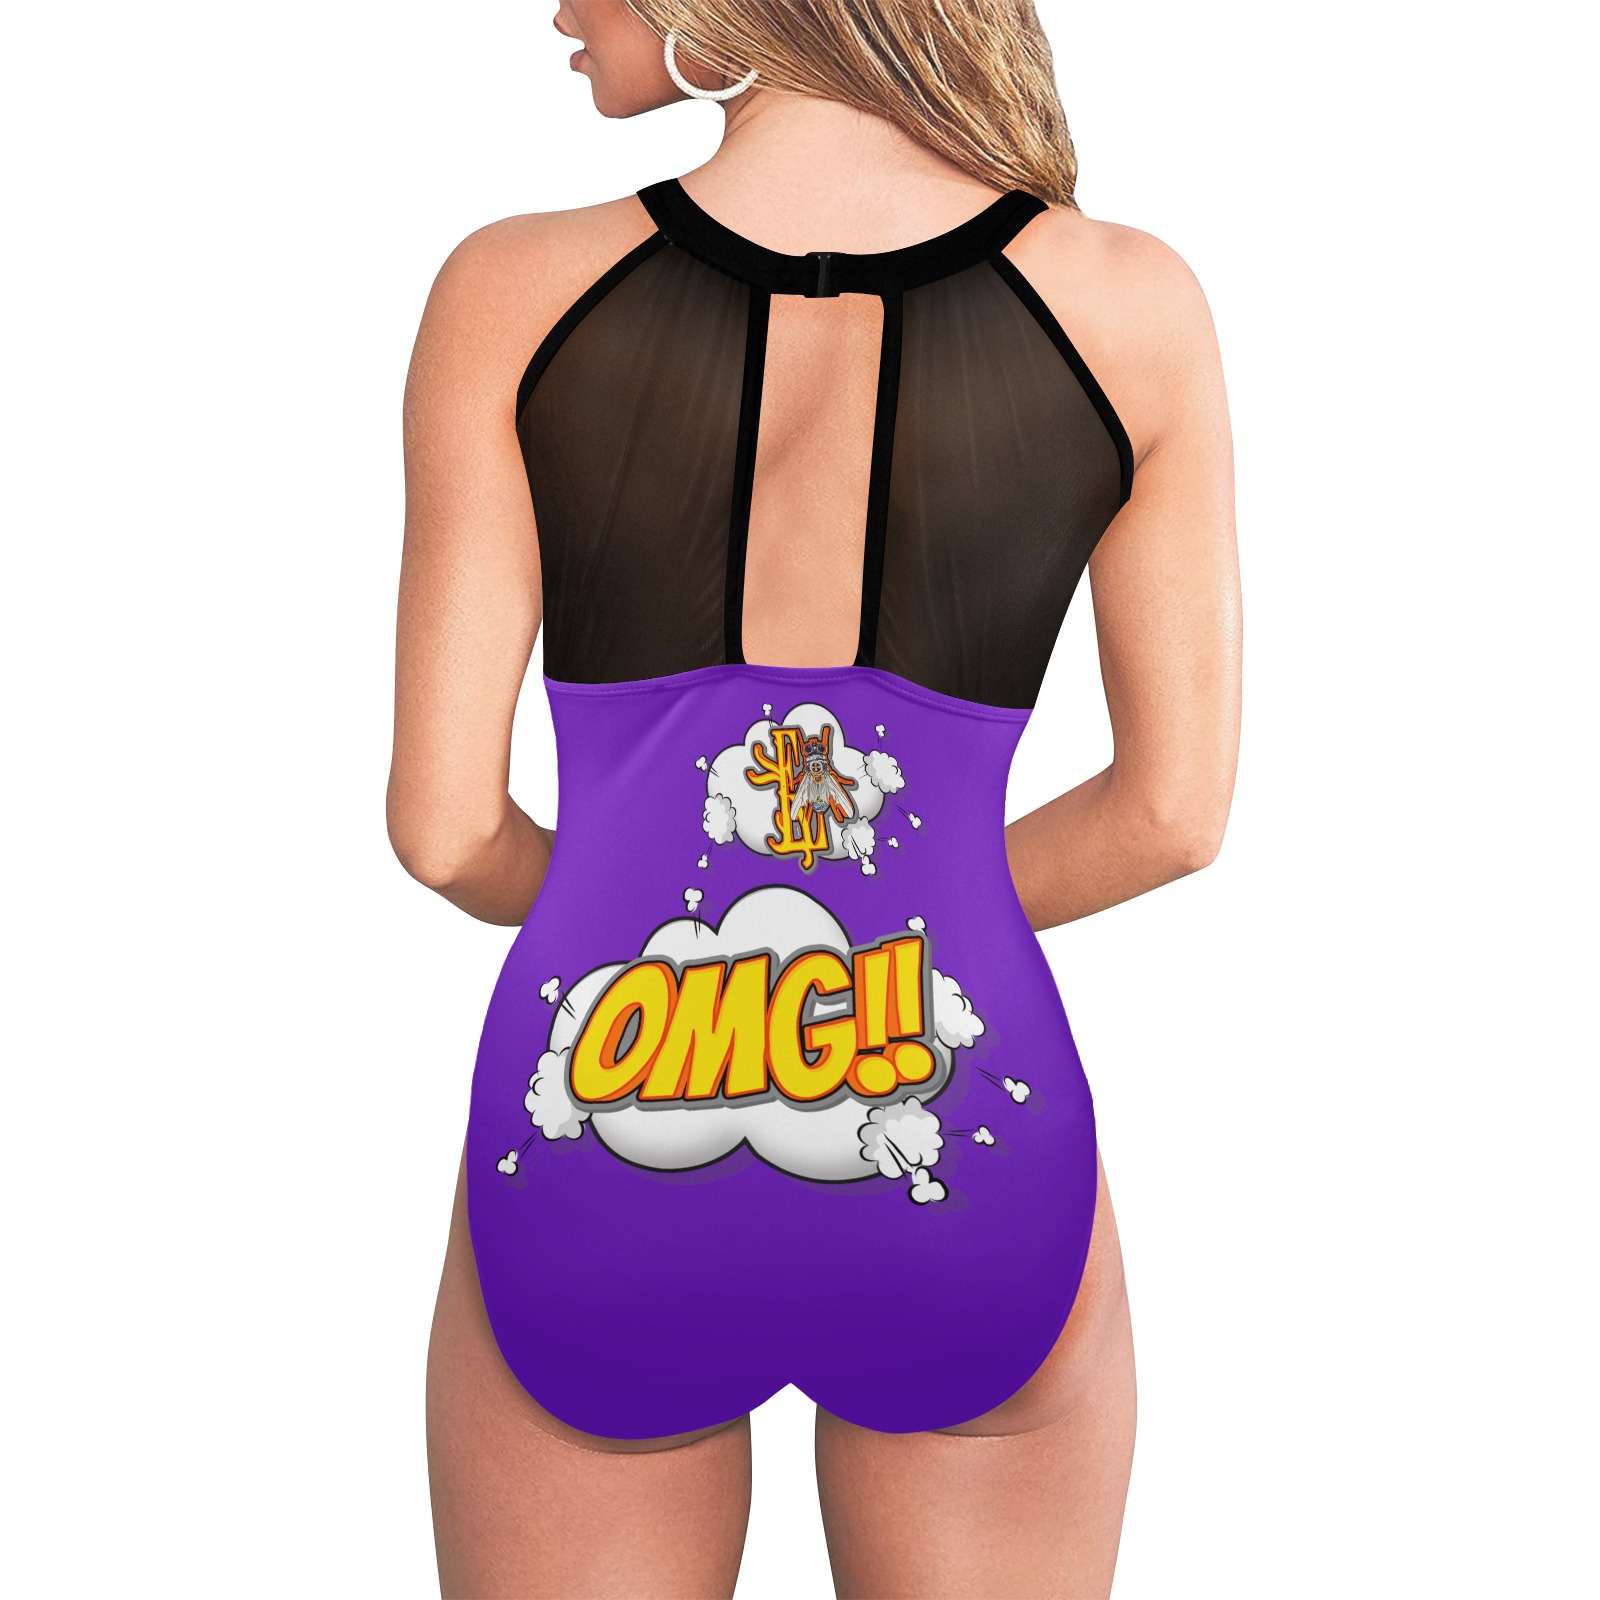 OMG!! Collectable Fly Women's High Neck Plunge Mesh Ruched Swimsuit (S43)